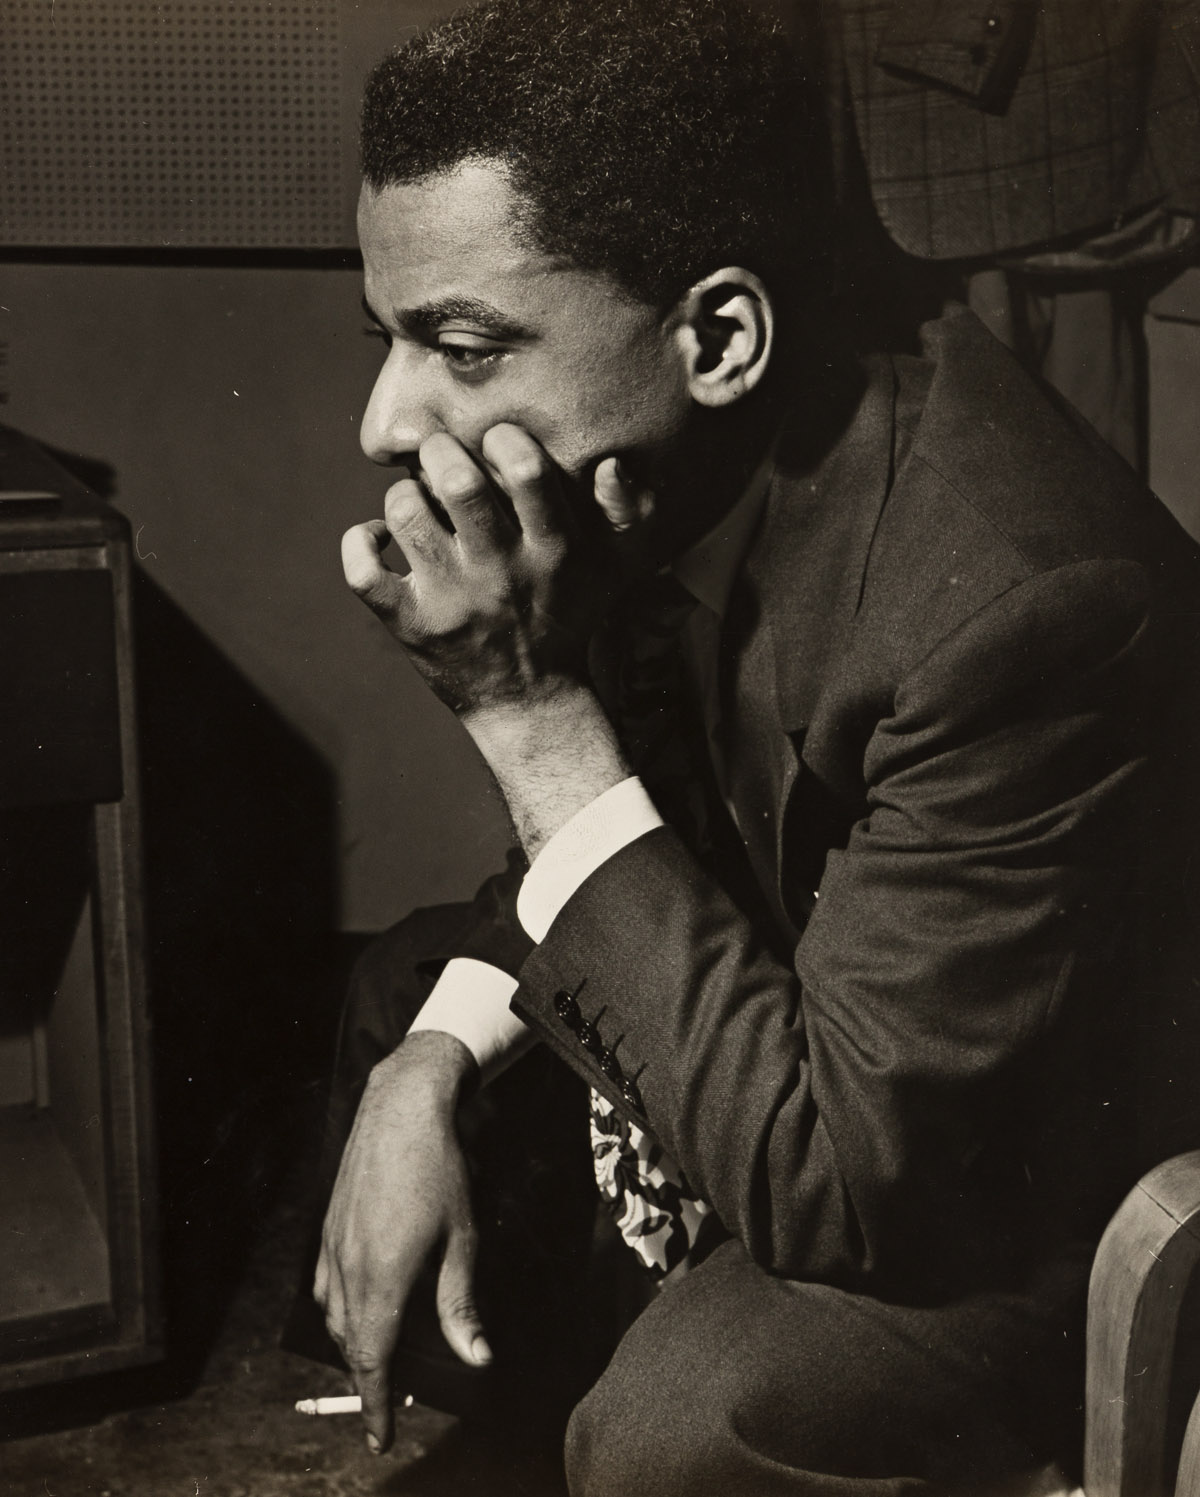 SKIPP ADELMAN & CHARLES PETERSON (1900-1976) A group of 4 jazz photographs, including two of Teddy Wilson by Adelman and one of Peewee